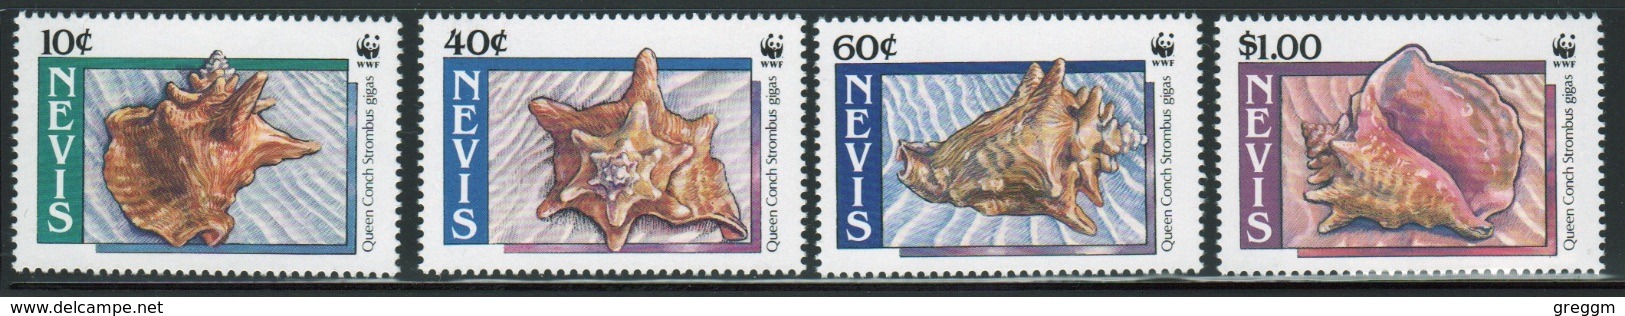 Nevis 1990set Of Stamps Celebrating The Pink And Queen Conch Shells. - St.Kitts And Nevis ( 1983-...)